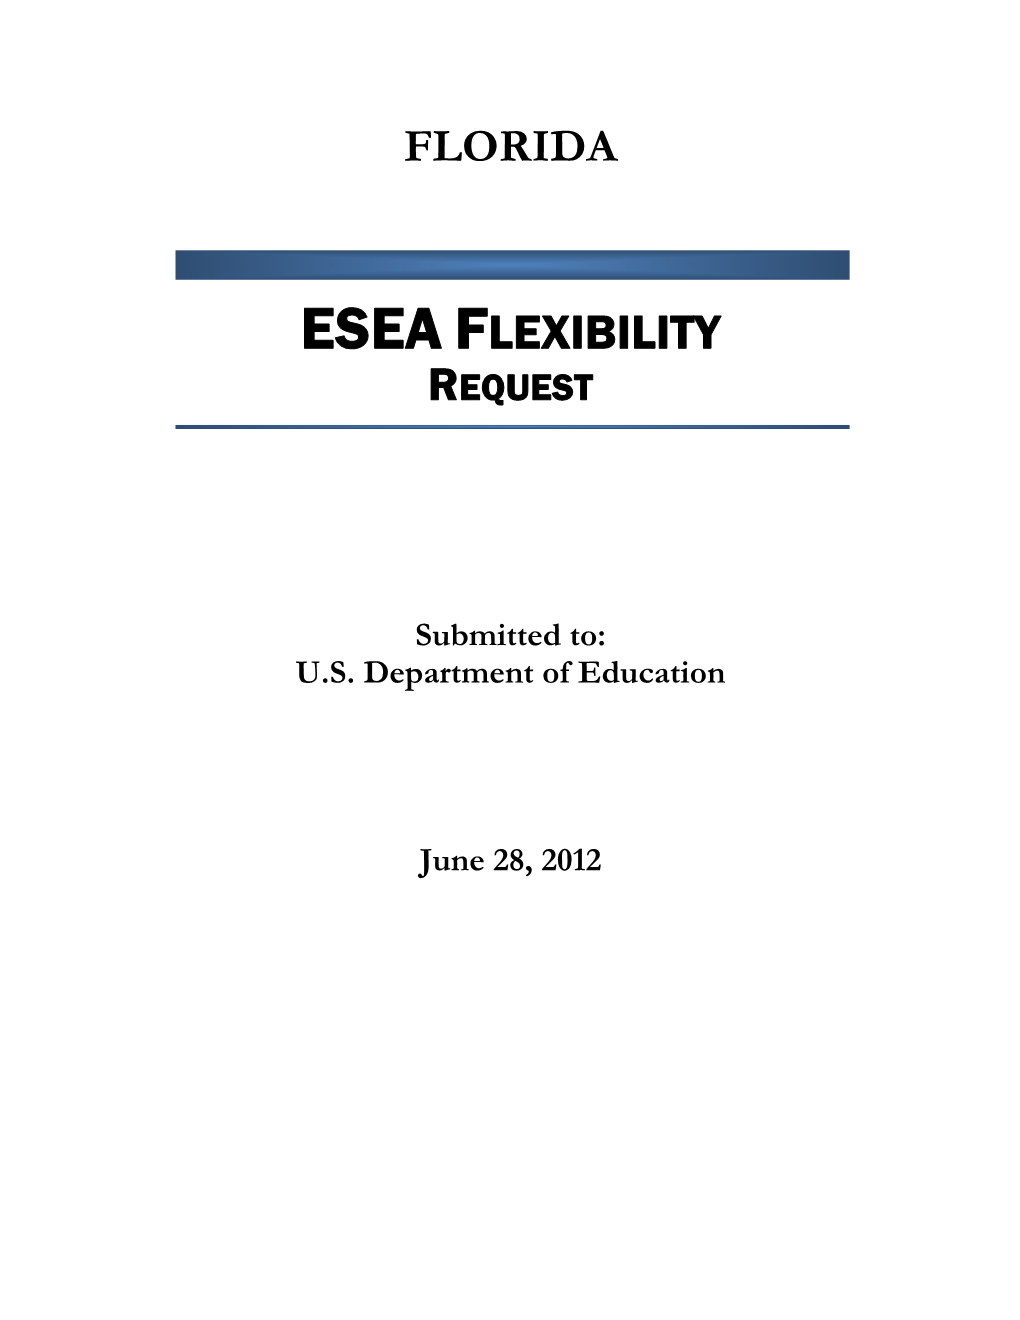 Florida: Amended Approved ESEA Flexibility Request